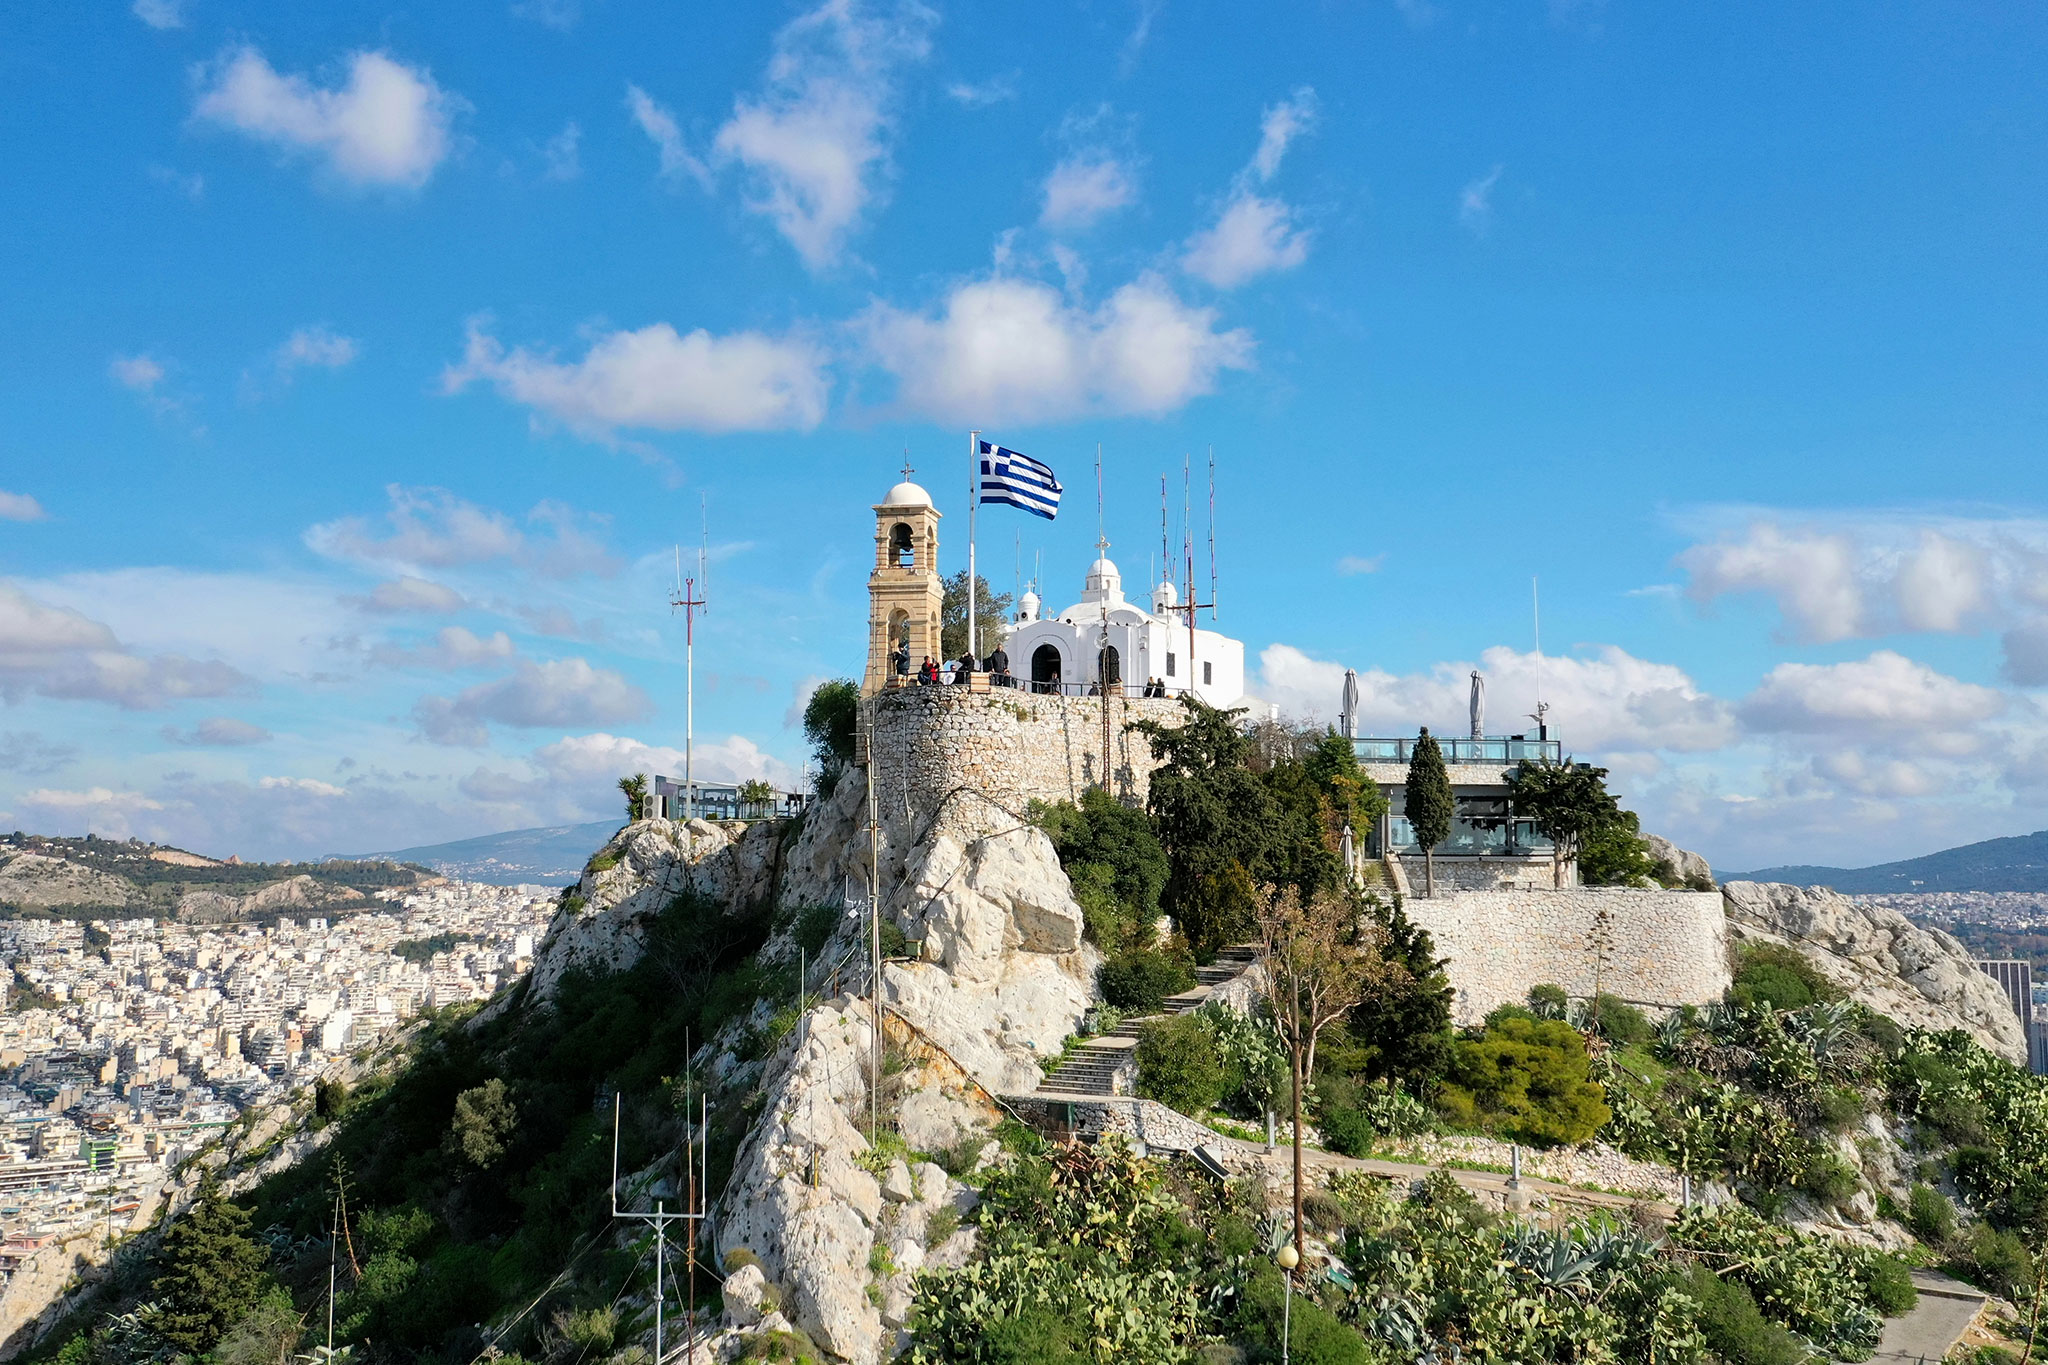 Aerial view of the Chapel of Saint George atop Lycabettus Hill in Athens, with a panoramic view of the city and mountains in the distance under a cloudy sky.